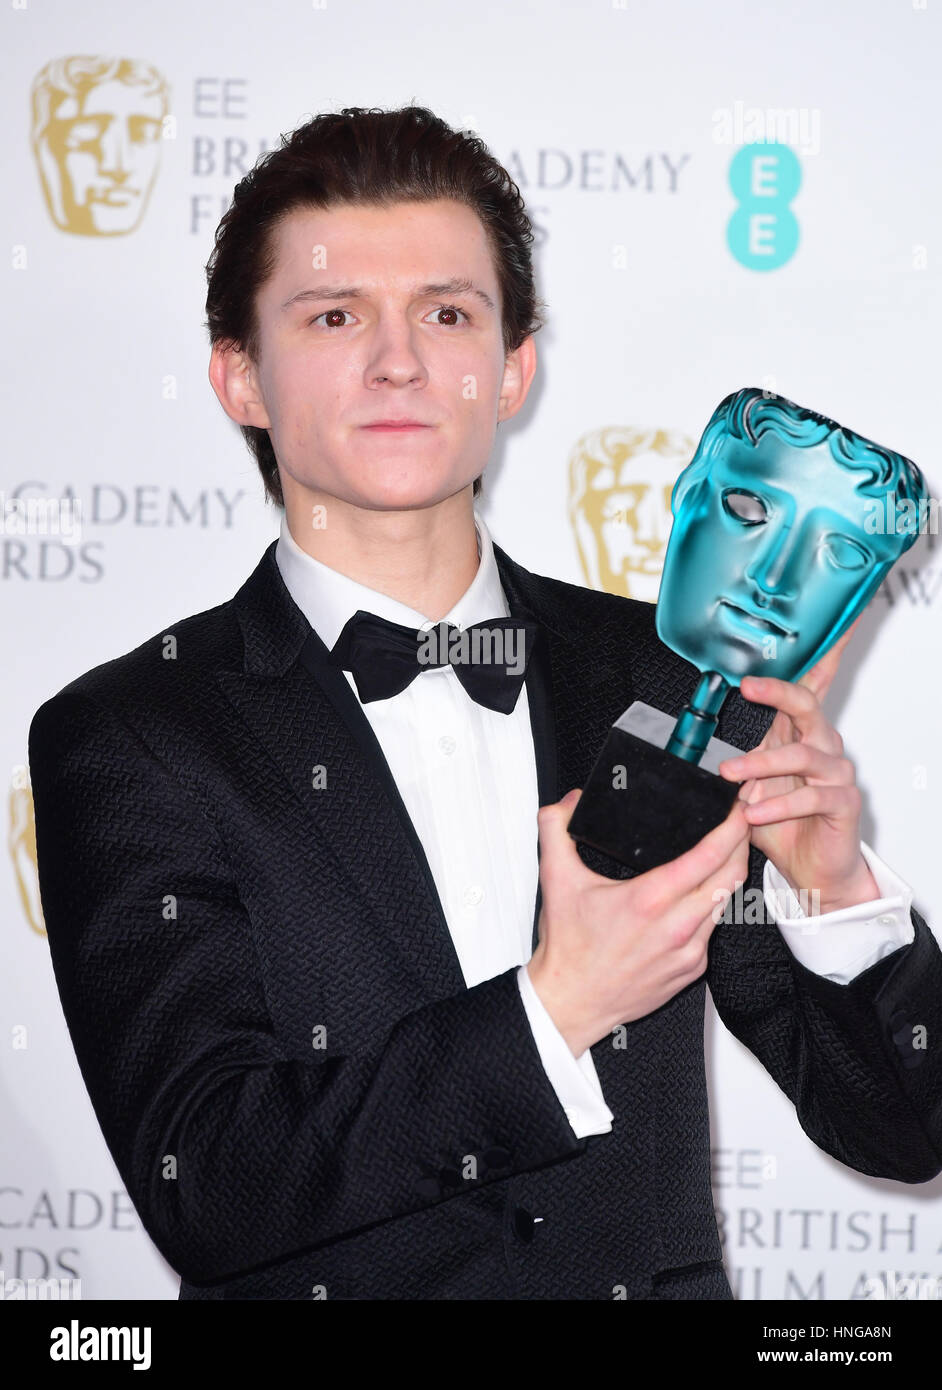 EE Rising Star winner actor Tom Holland in the press room during the EE  British Academy Film Awards held at the Royal Albert Hall, Kensington Gore,  Kensington, London. PRESS ASSOCIATION Photo. Picture